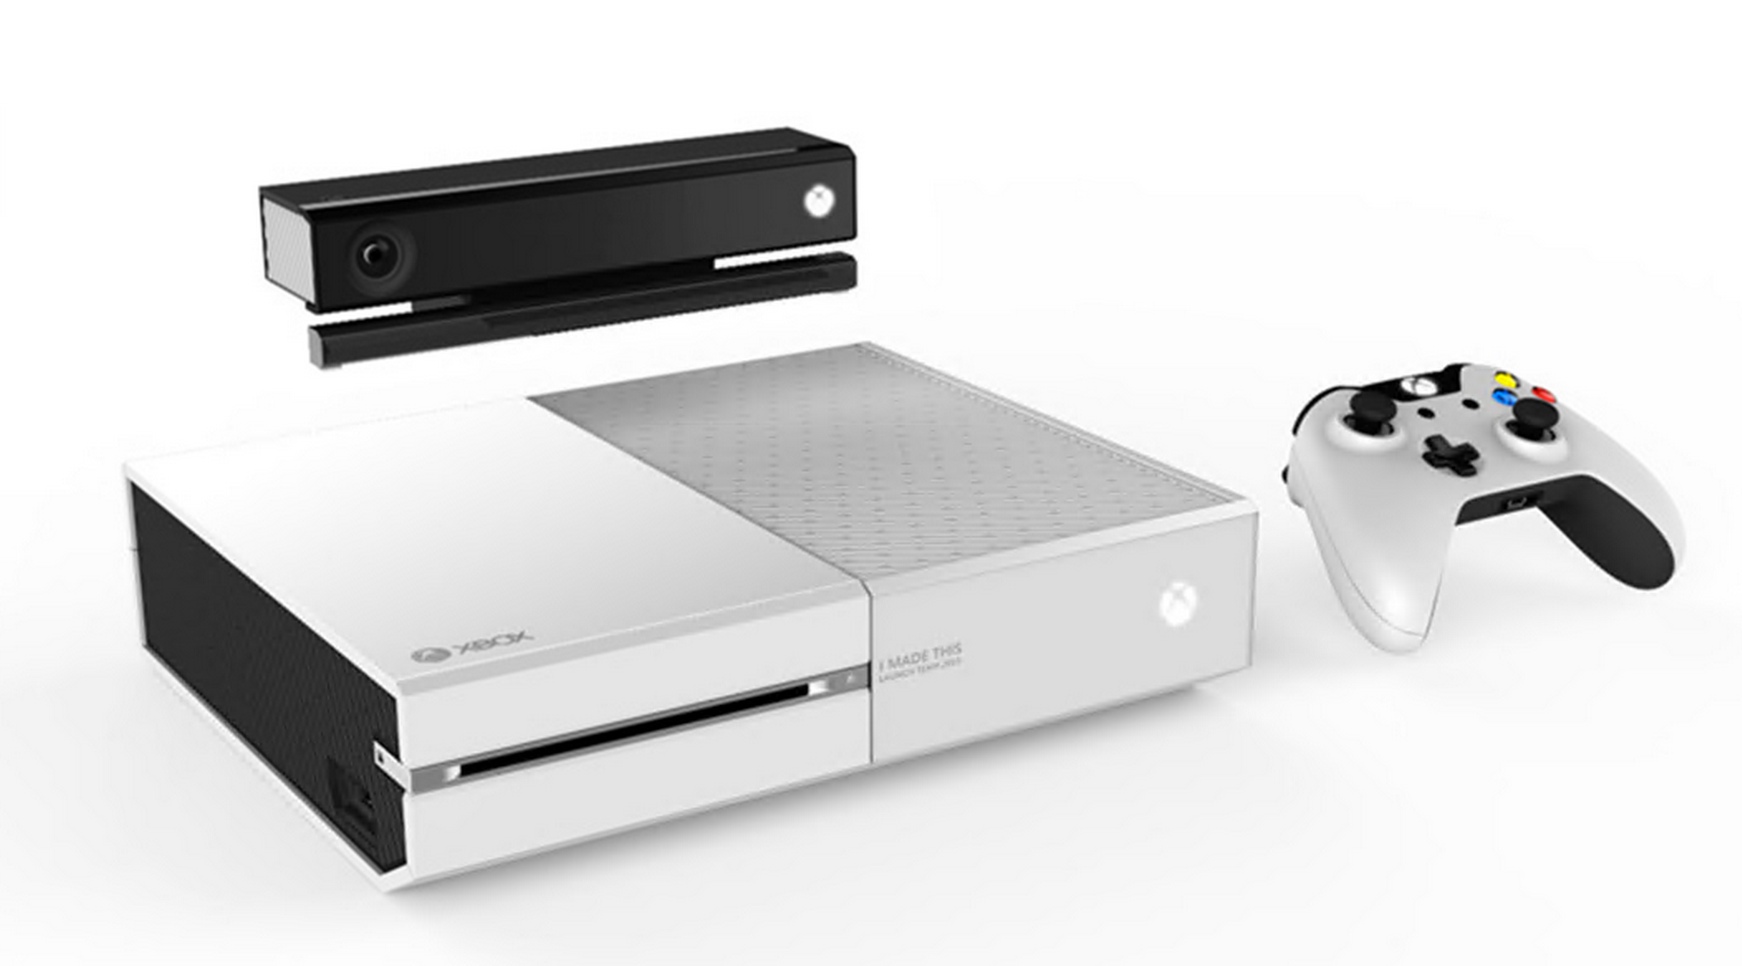 microsoft reportedly has white xbox one release set for october image 1